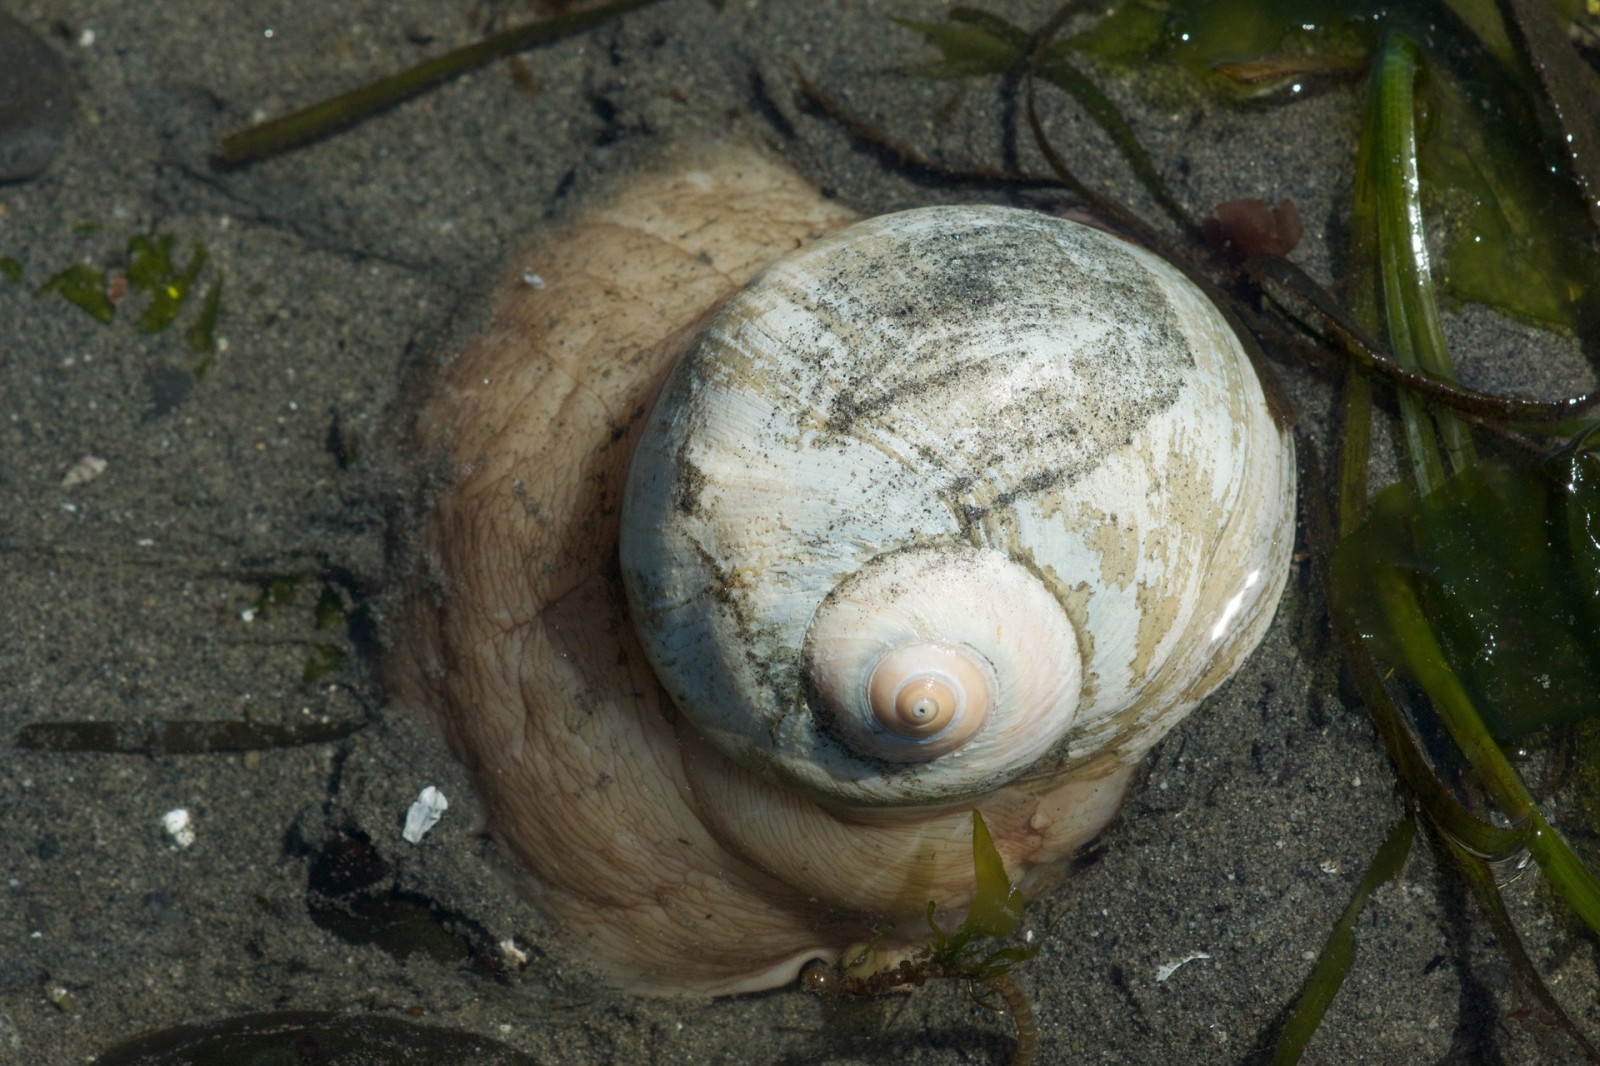 King and Snohomish County low tide discoveries, 2015